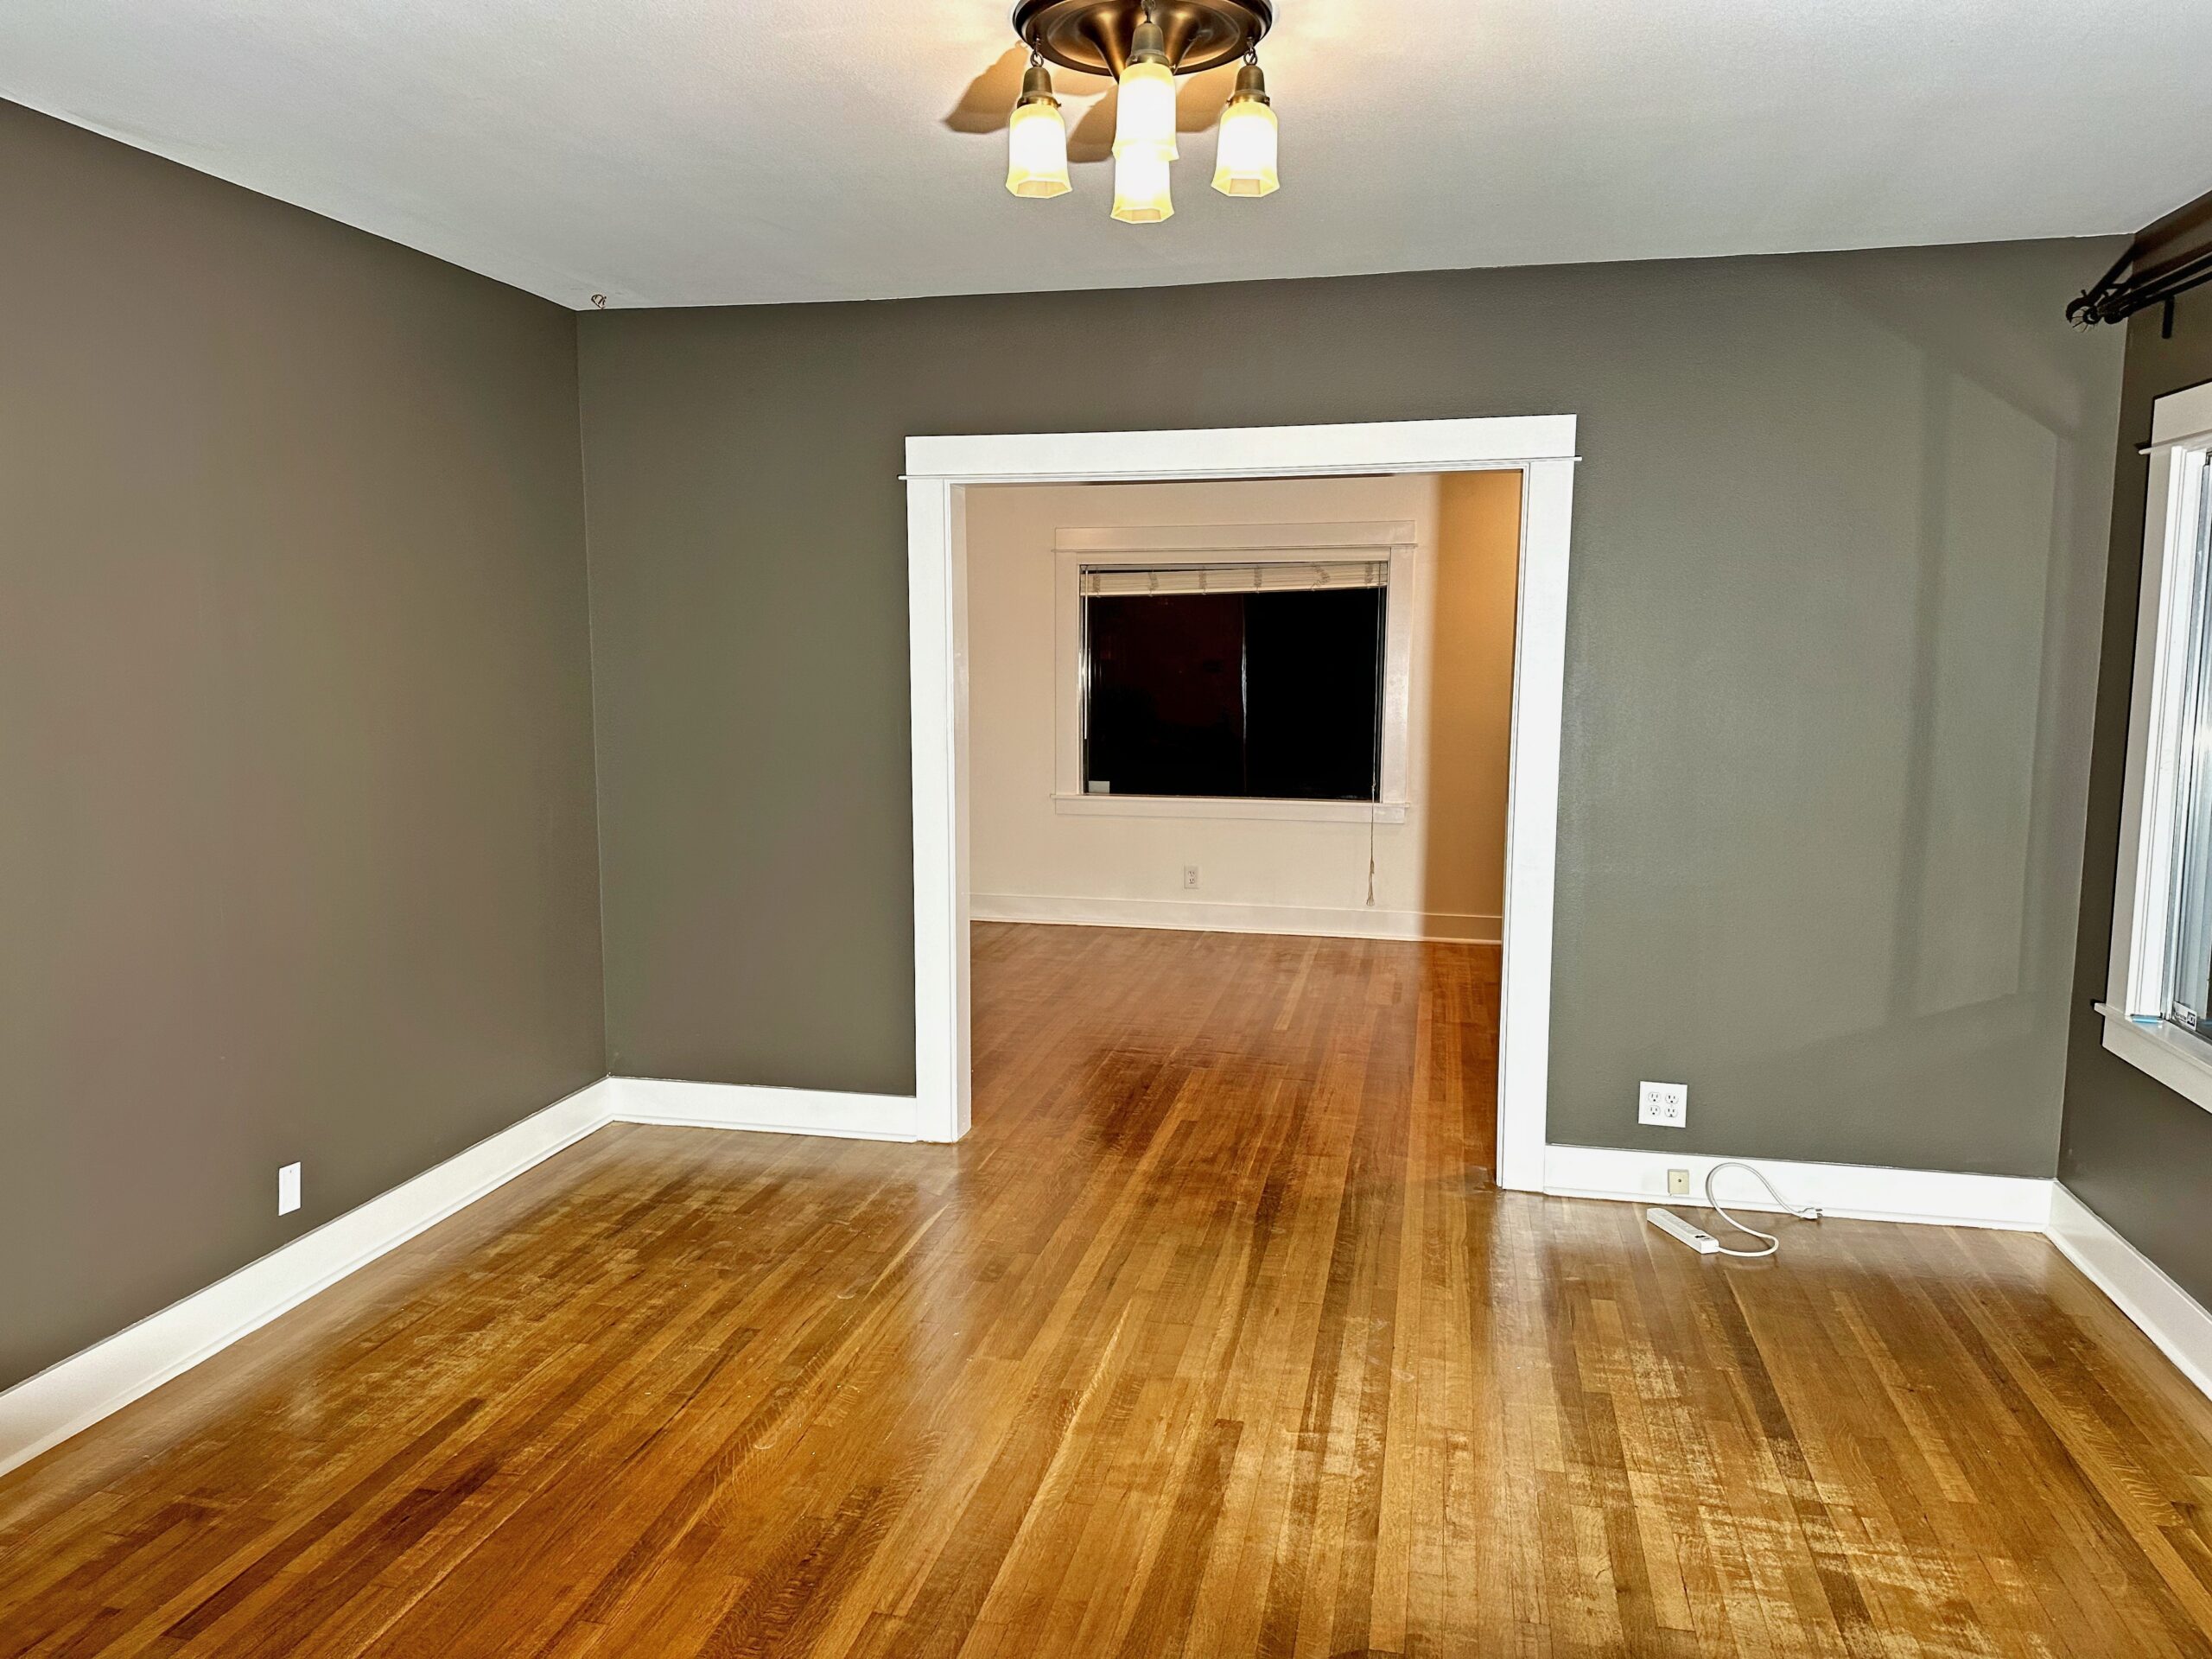 "Interior view of a room with walls painted in a rich taupe shade, complemented by bright white trim around the windows, door, and baseboards by Paintitrightpro."